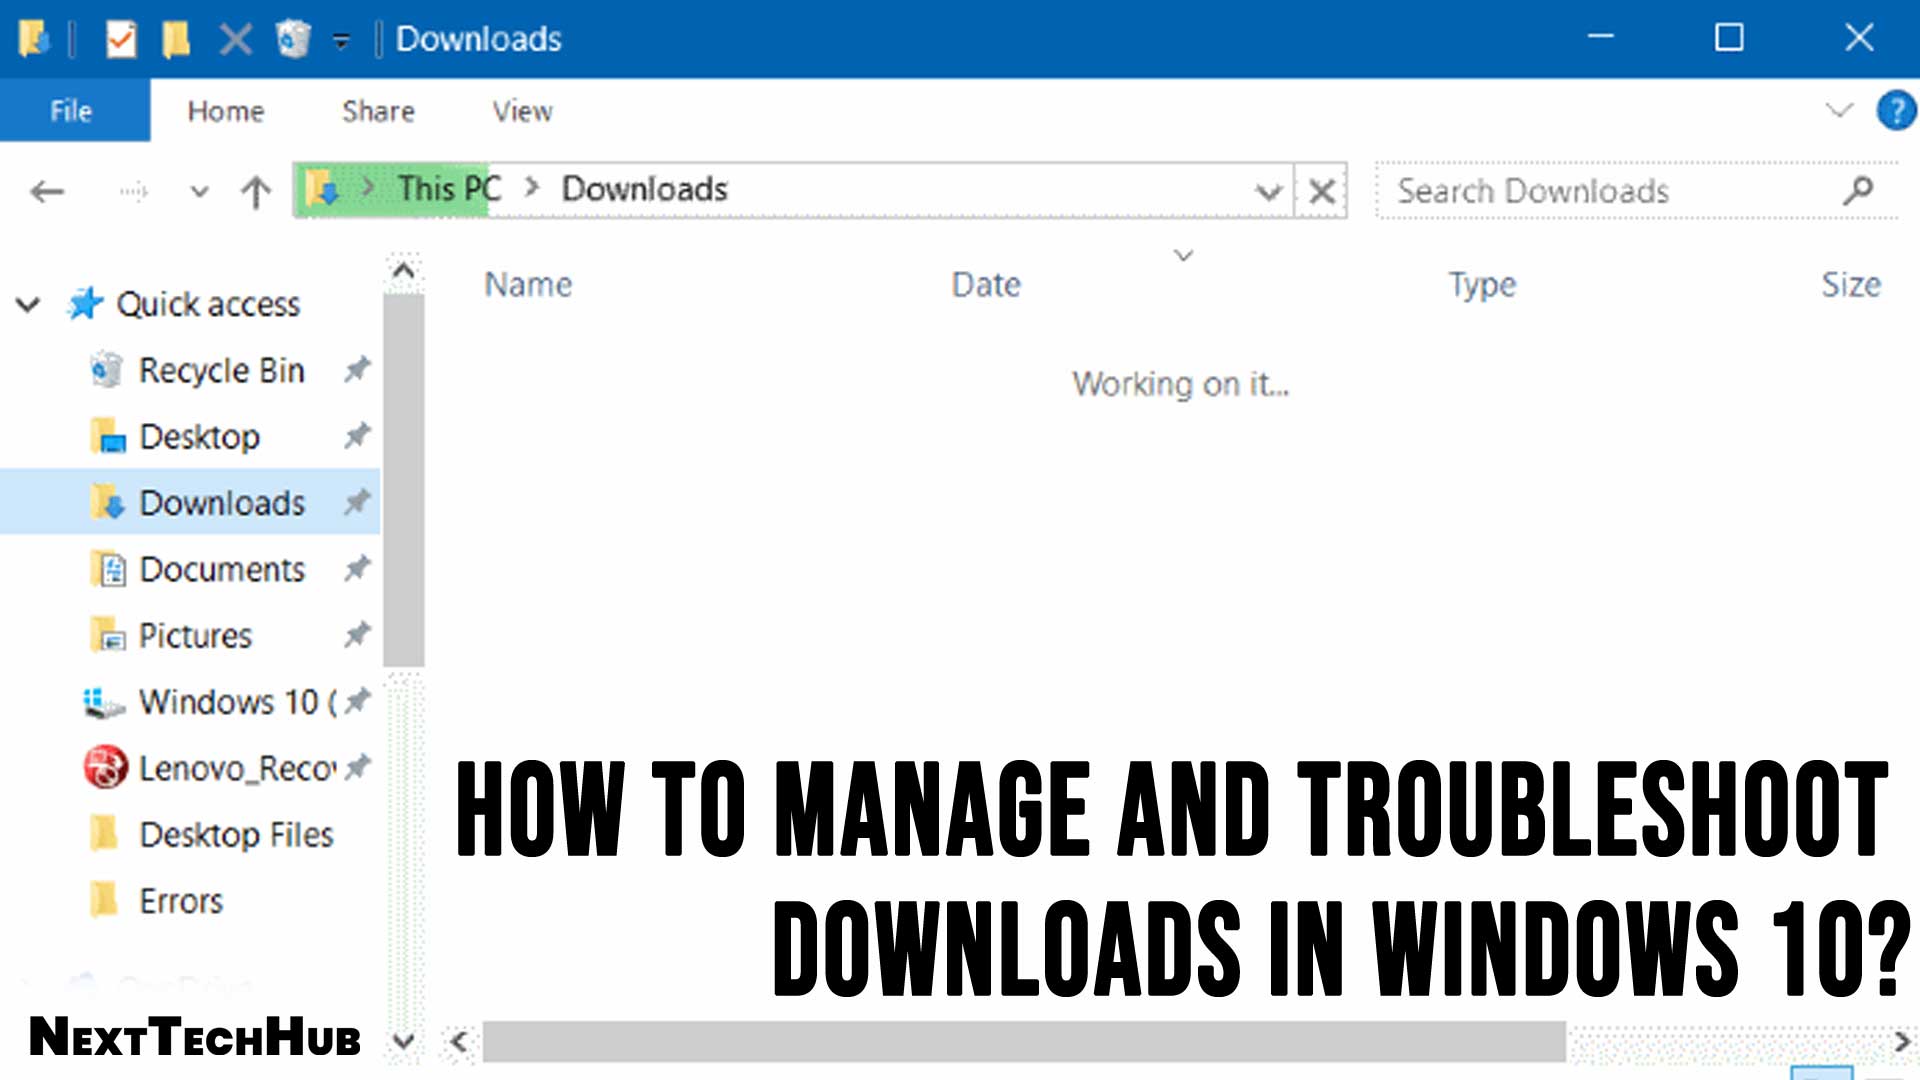 How To Manage And Troubleshoot Downloads In Windows 10